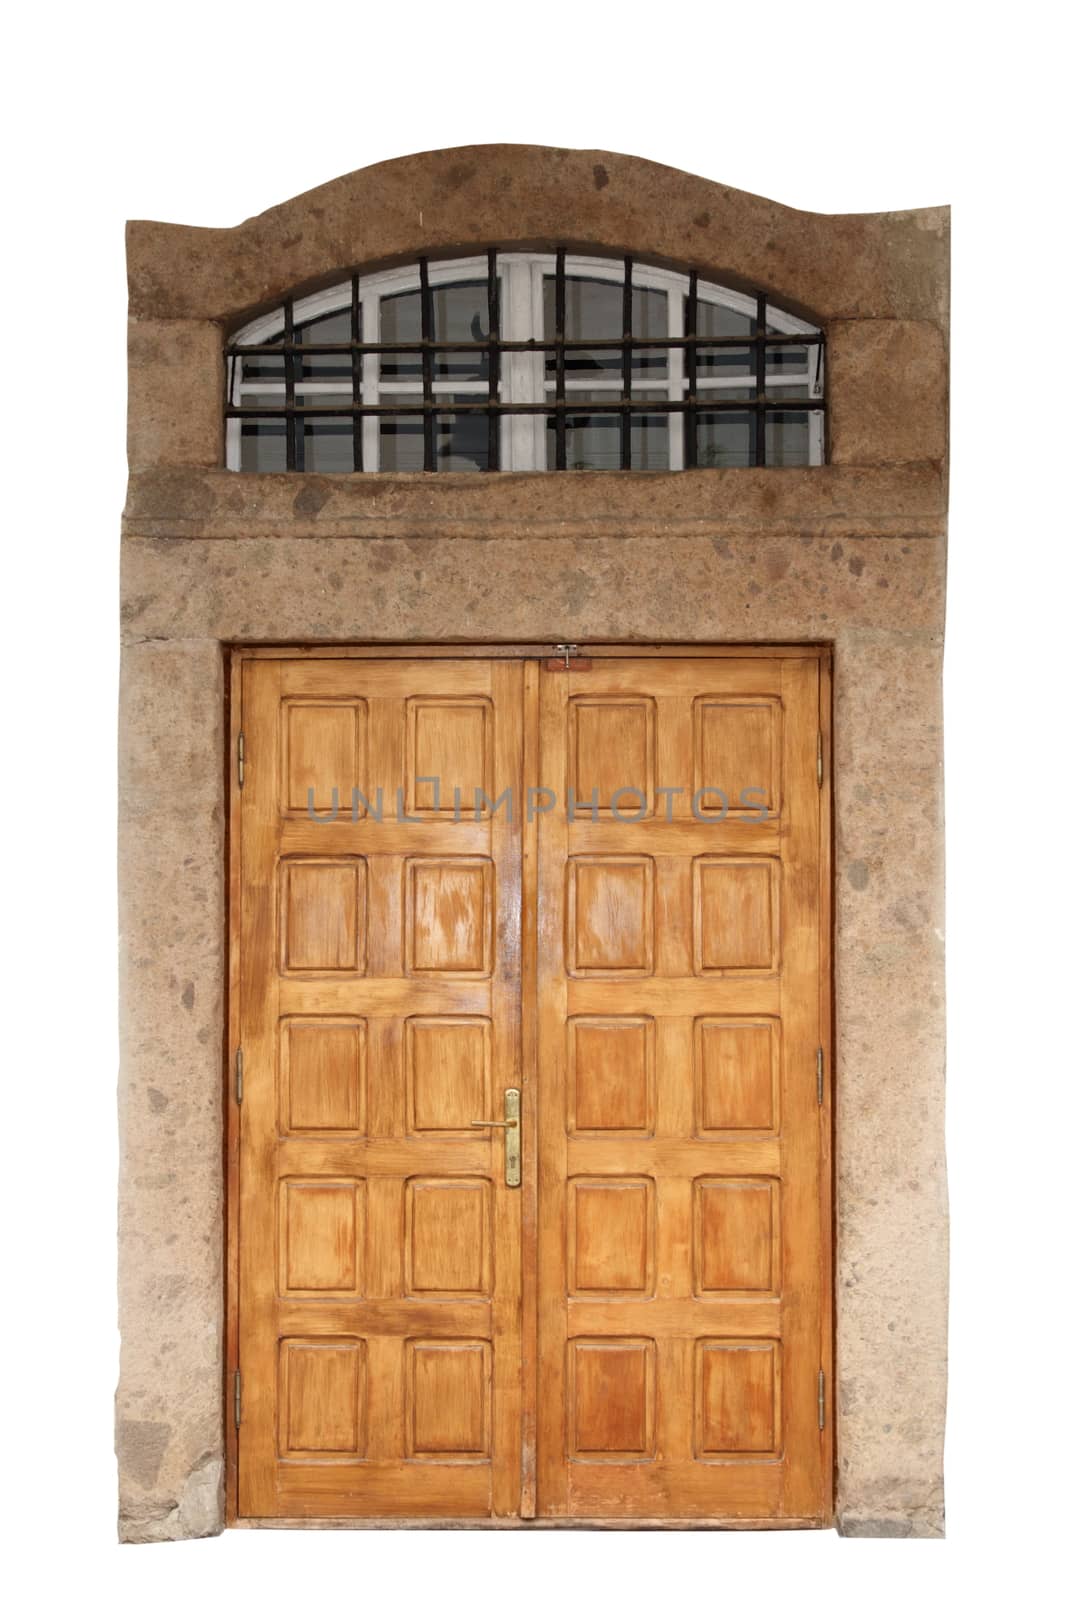 wooden door with stone border by taviphoto